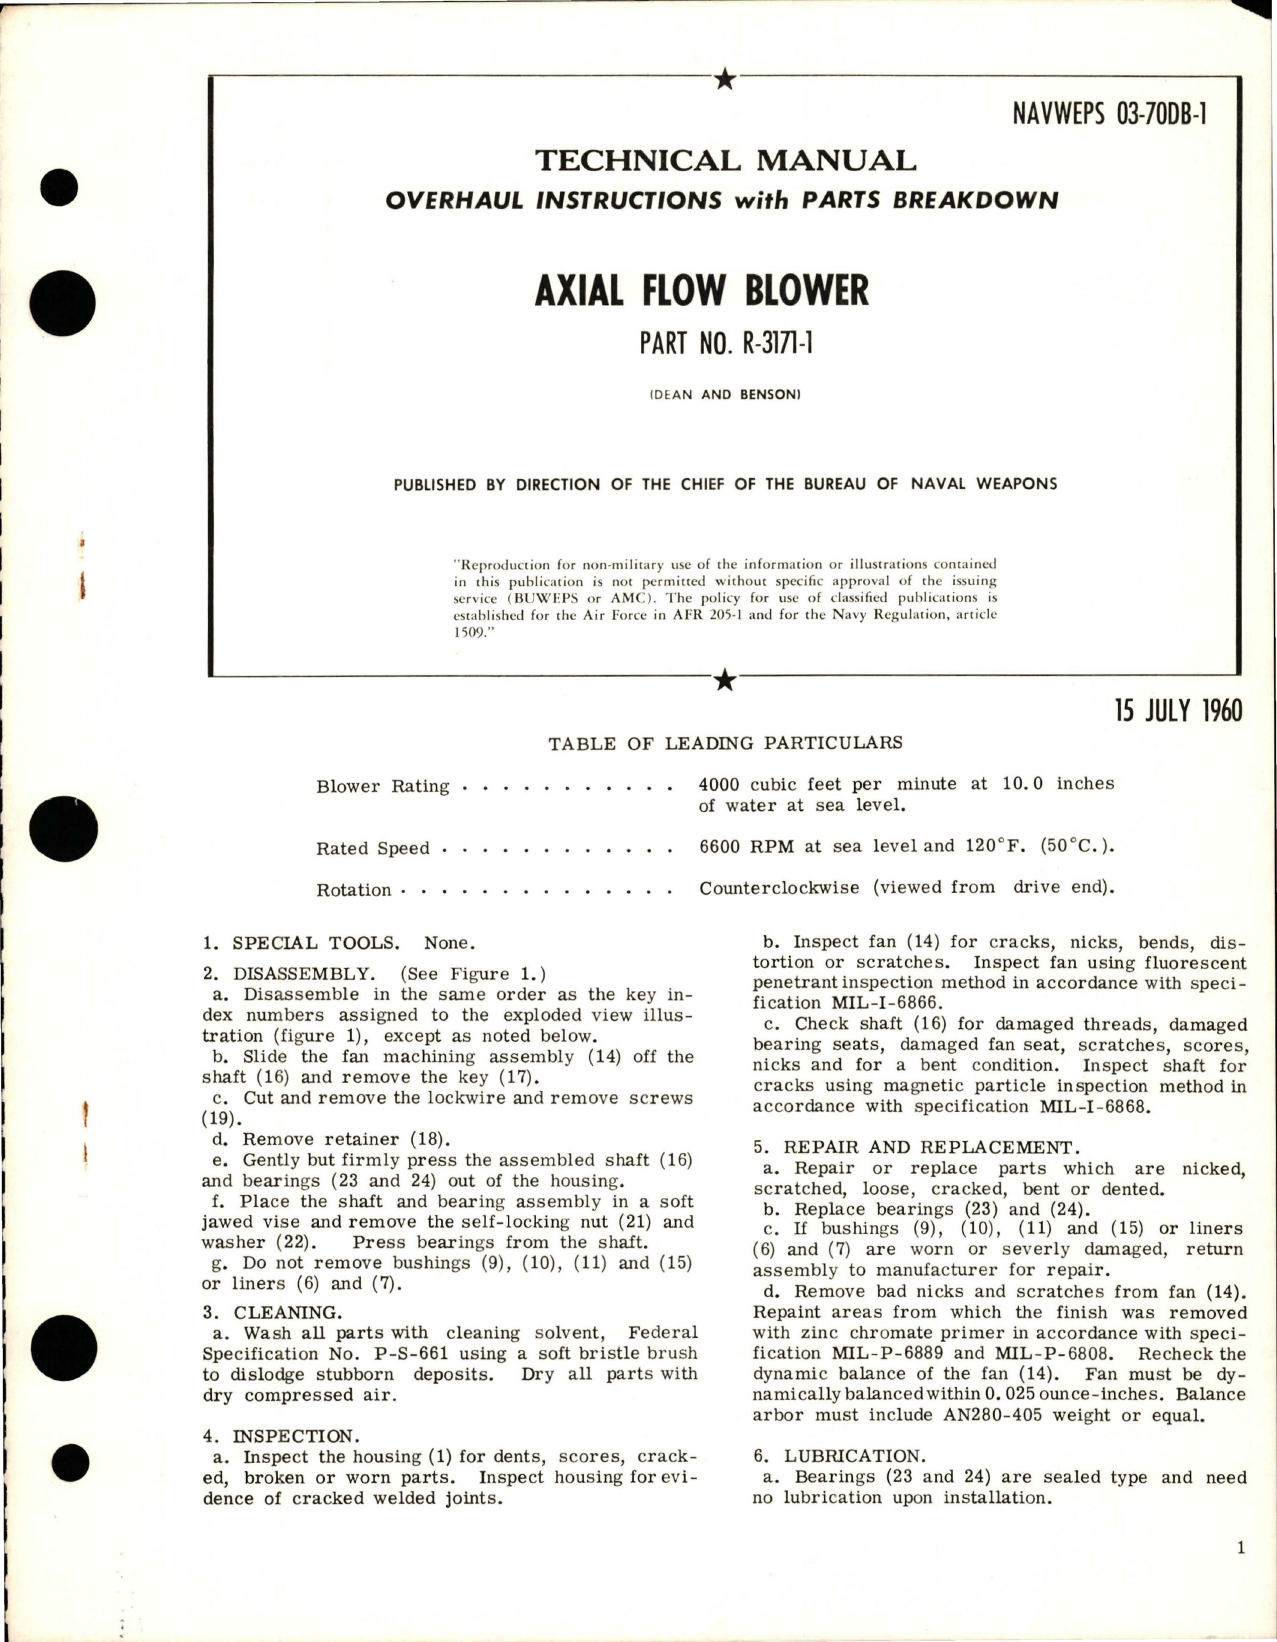 Sample page 1 from AirCorps Library document: Overhaul Instructions with Parts Breakdown for Axial Flow Blower - Part R-3171-1